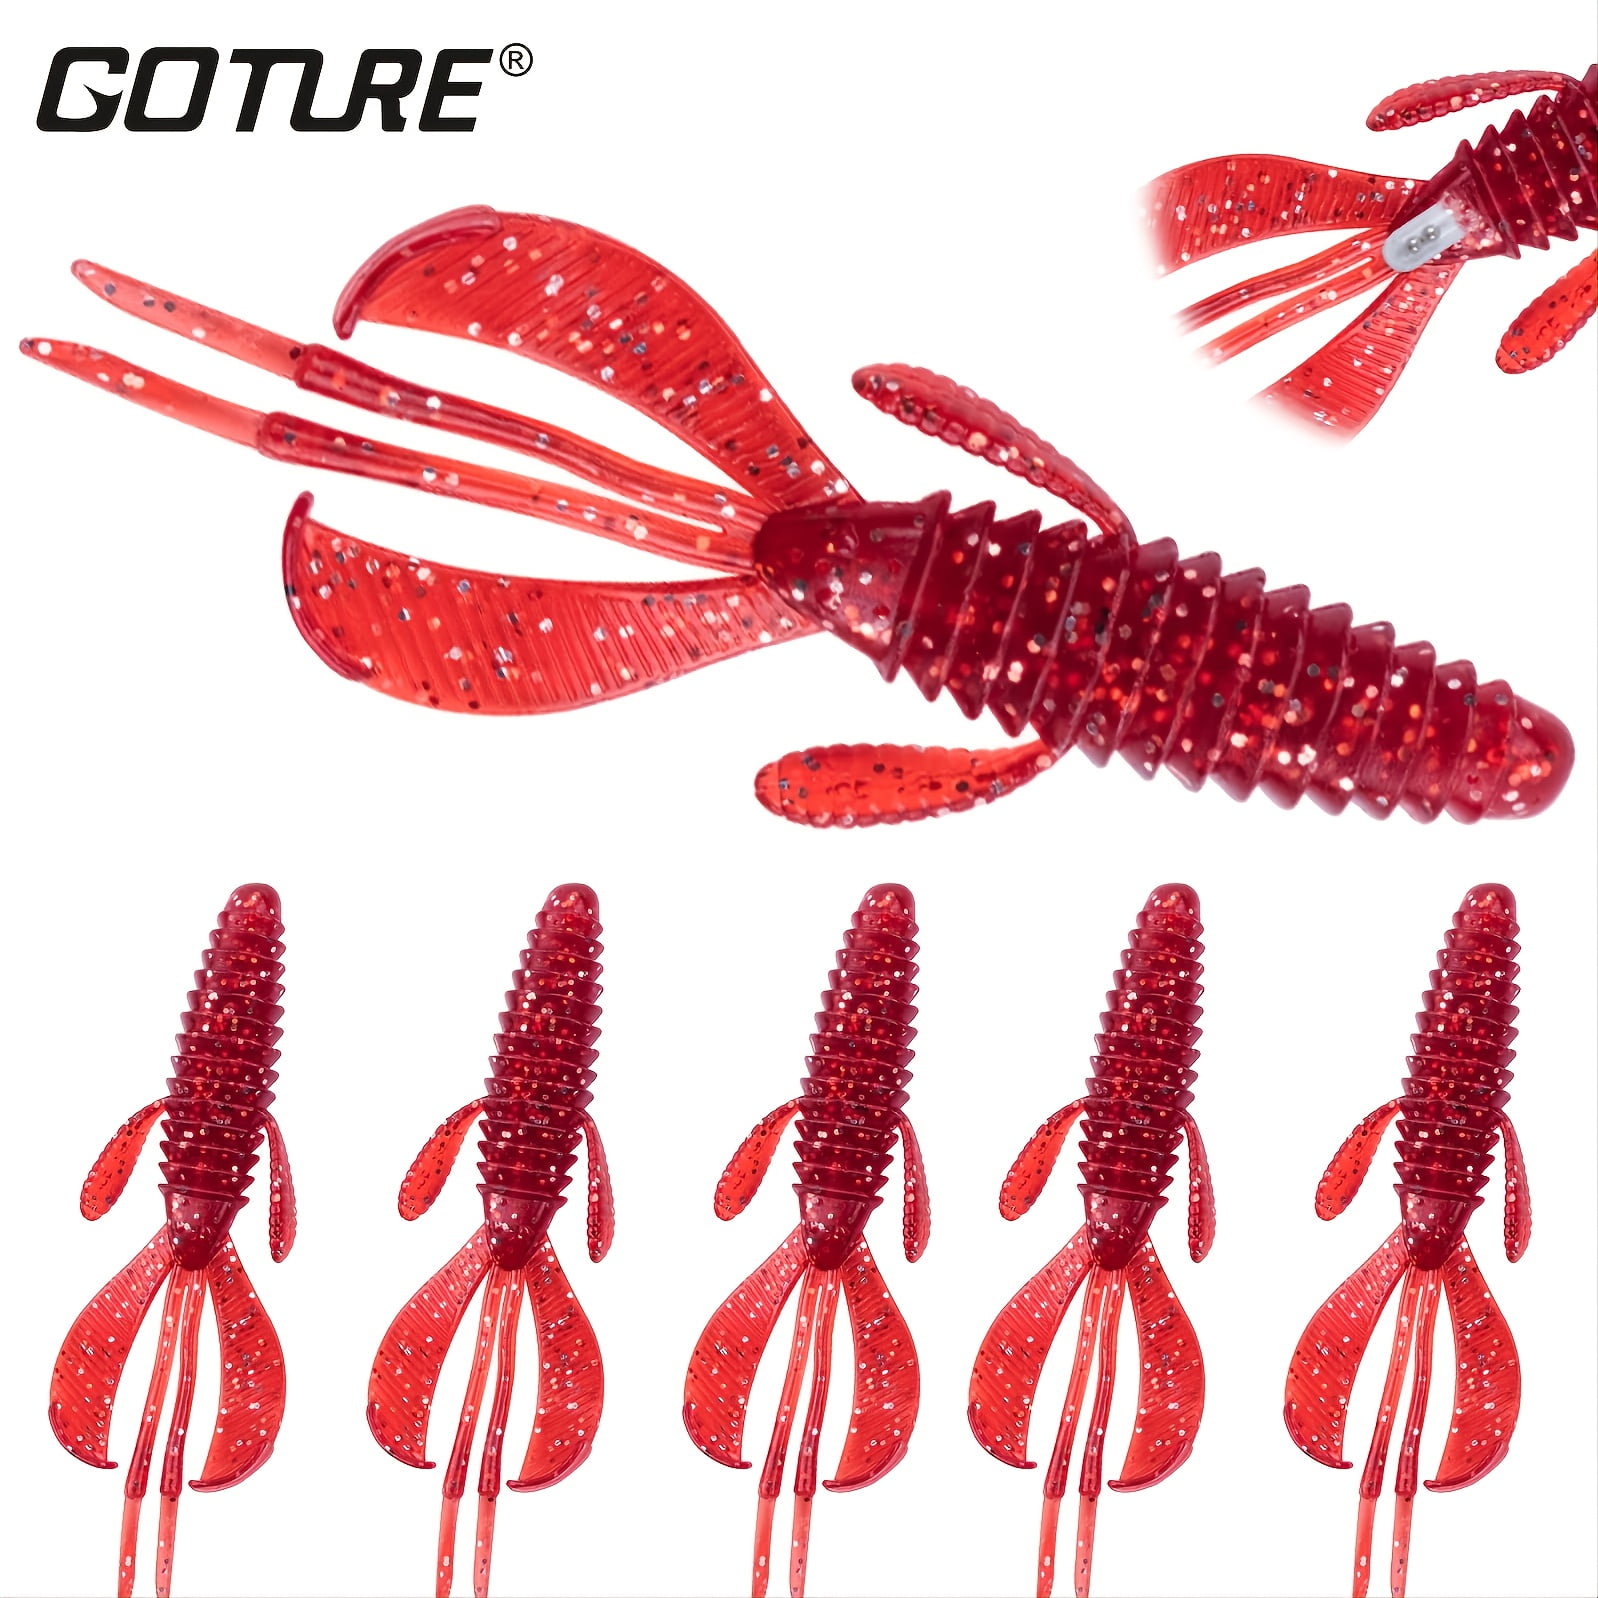 Goture Fishing Soft Plastic Lures Kit Jig Head Hooks Crappie Lures Trout  Bass Fishing Worm Lures Crappie Jigs Fishing Lures Set with Tackl Box for Freshwater  Saltwater Fishing 